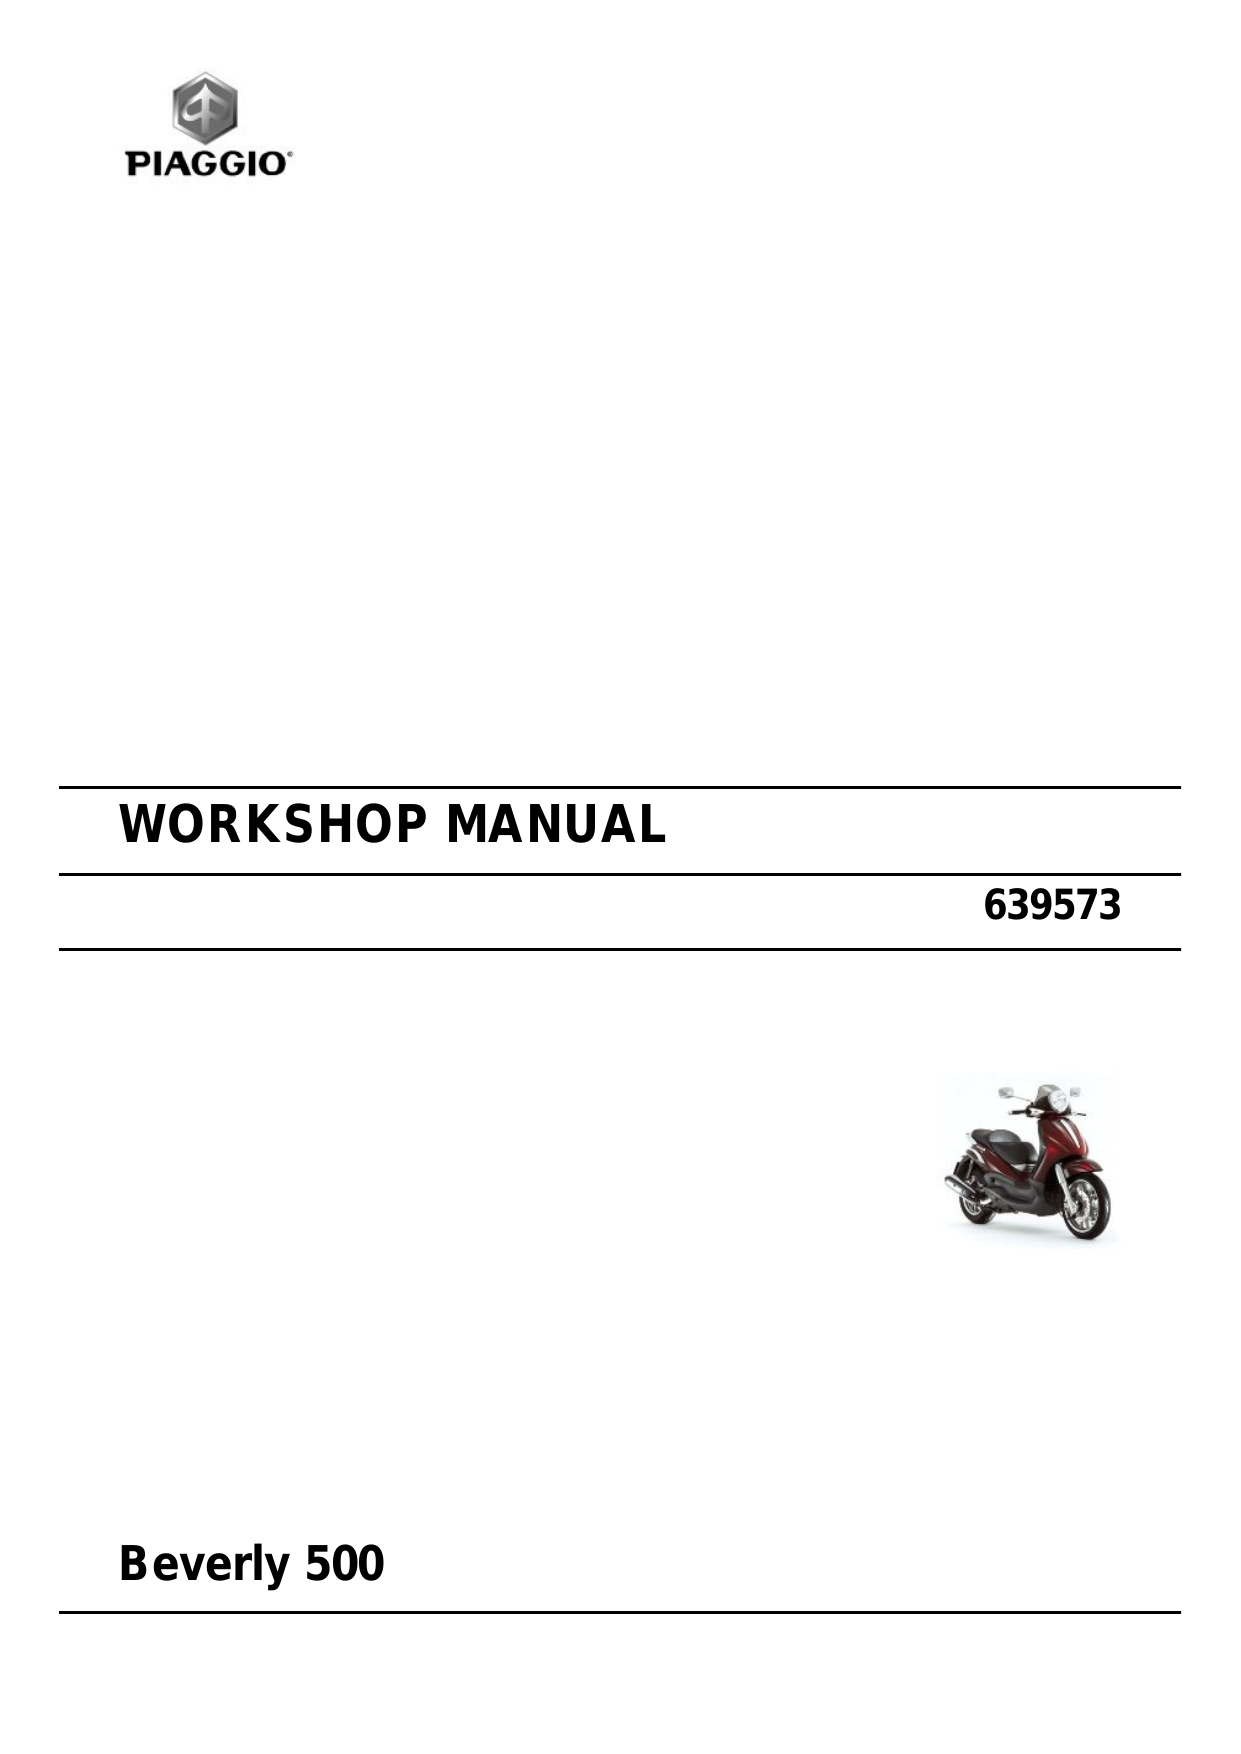 Piaggio Beverly 500 workshop manual Preview image 1